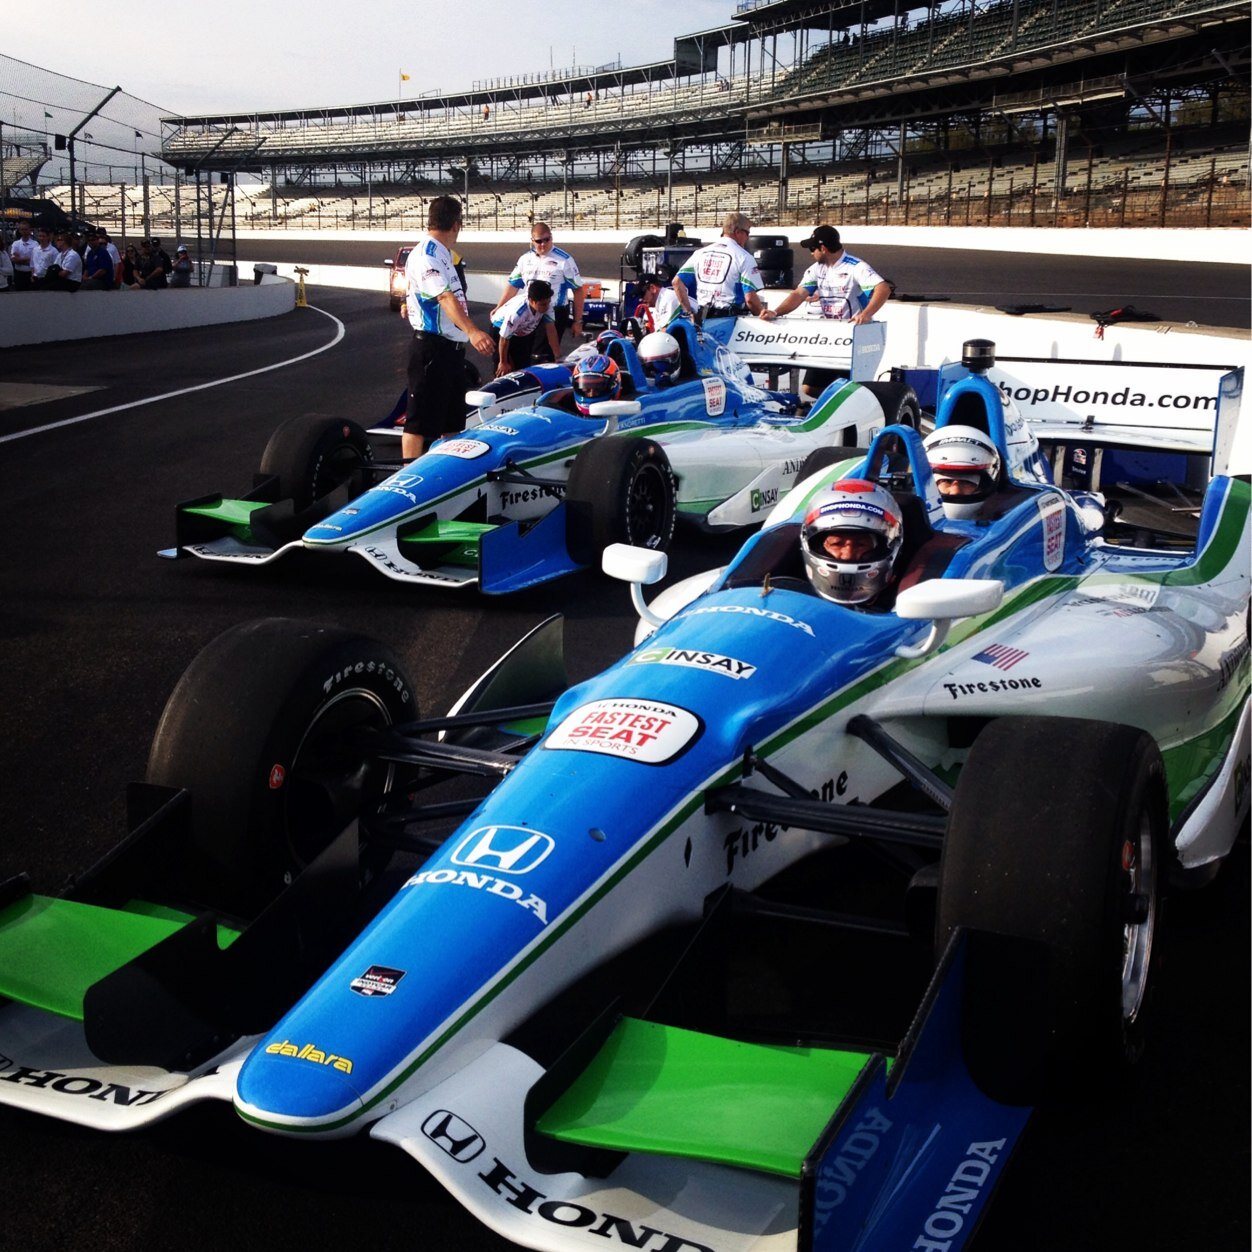 Ride or Drive an IndyCar at the Indianapolis Motor Speedway and anywhere else the Verizon IndyCar Series competes!